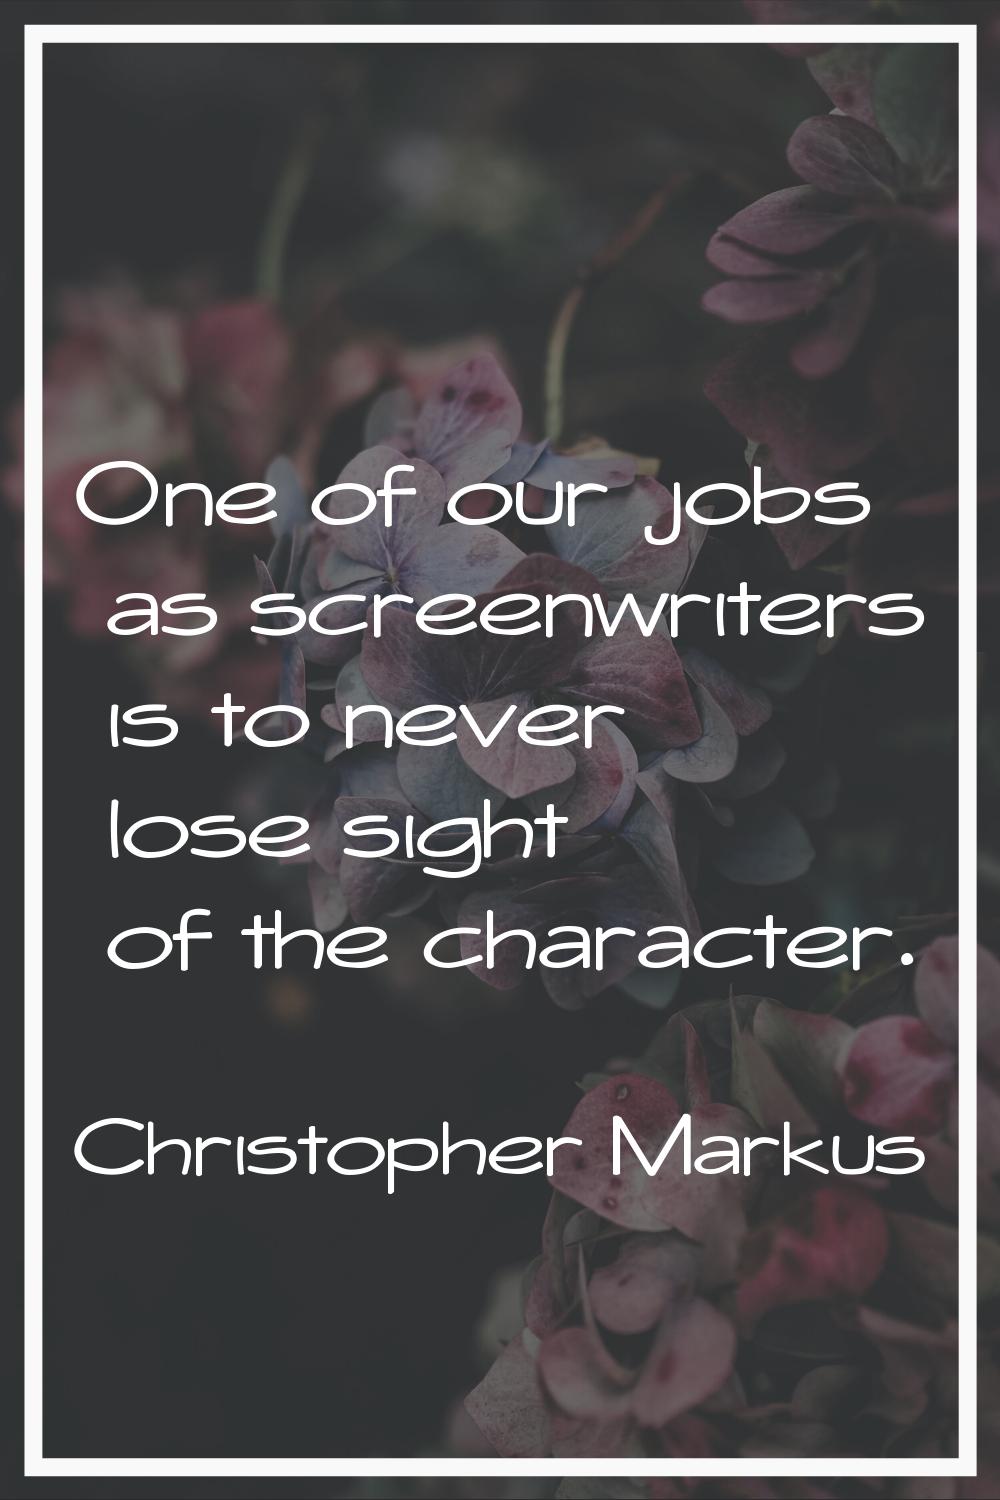 One of our jobs as screenwriters is to never lose sight of the character.